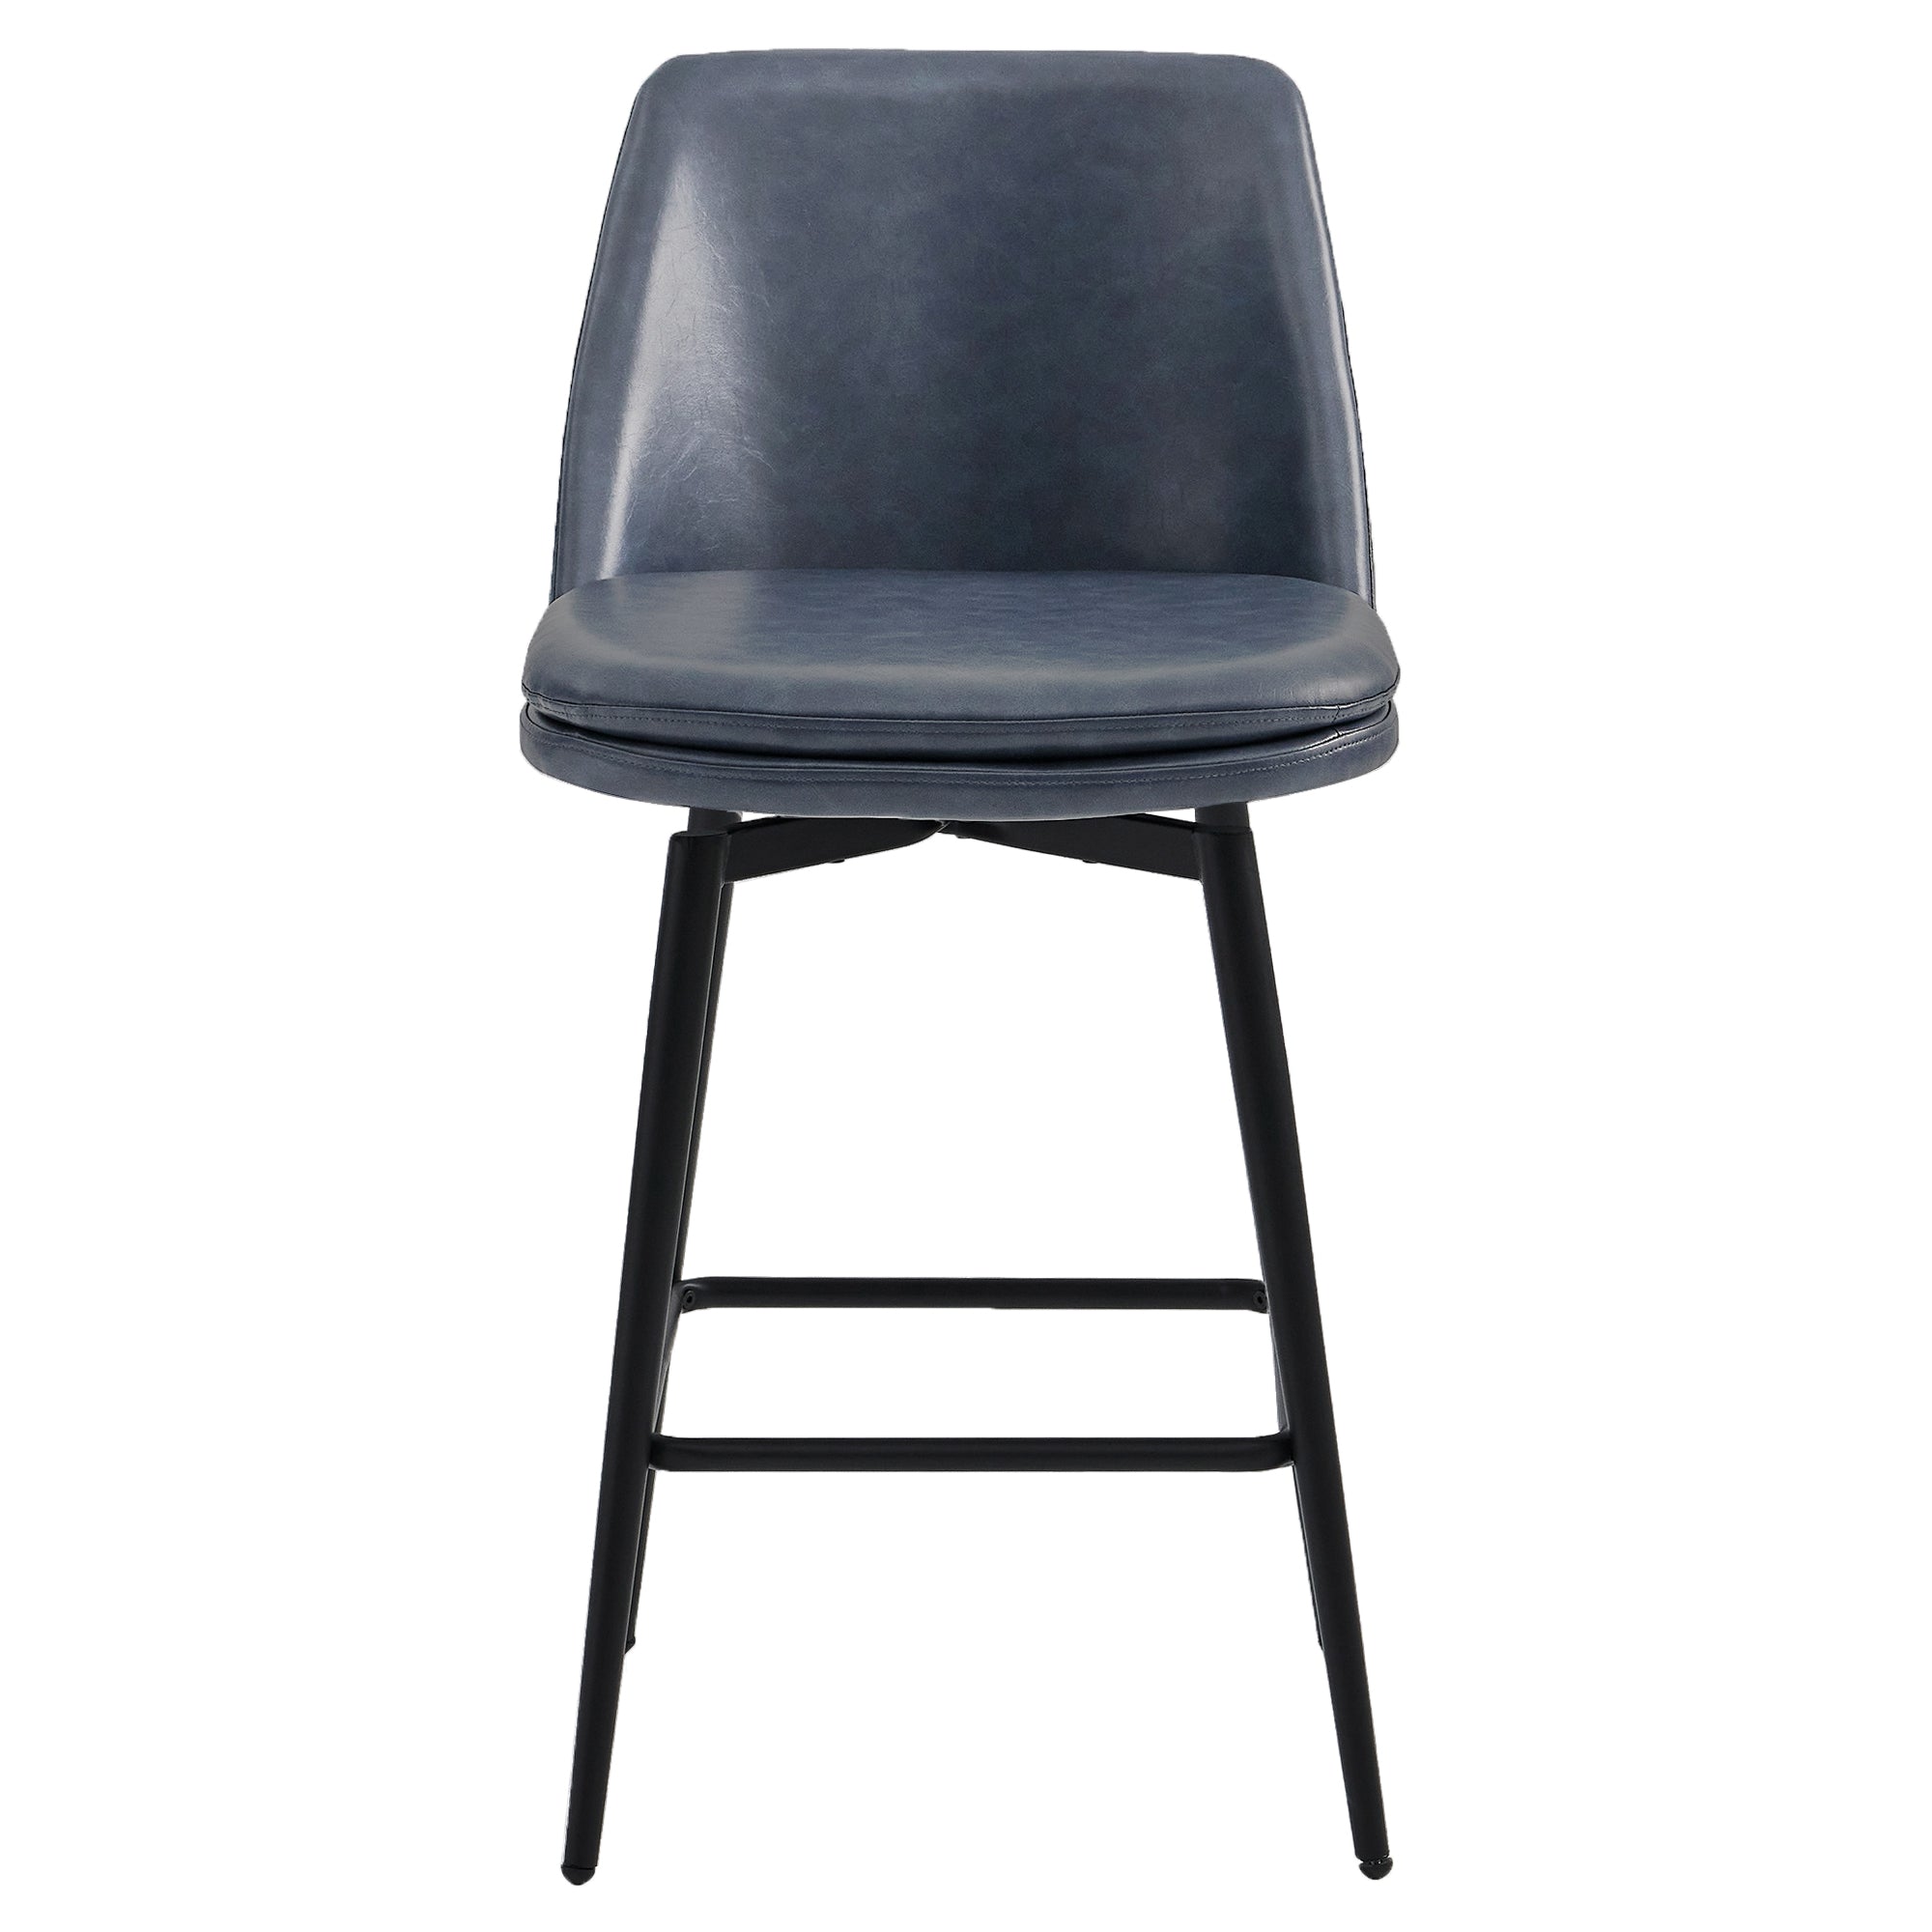 CHITA LIVING-Eli Swivel Counter Stool-Counter Stools-Faux Leather-Blue-Set of 2